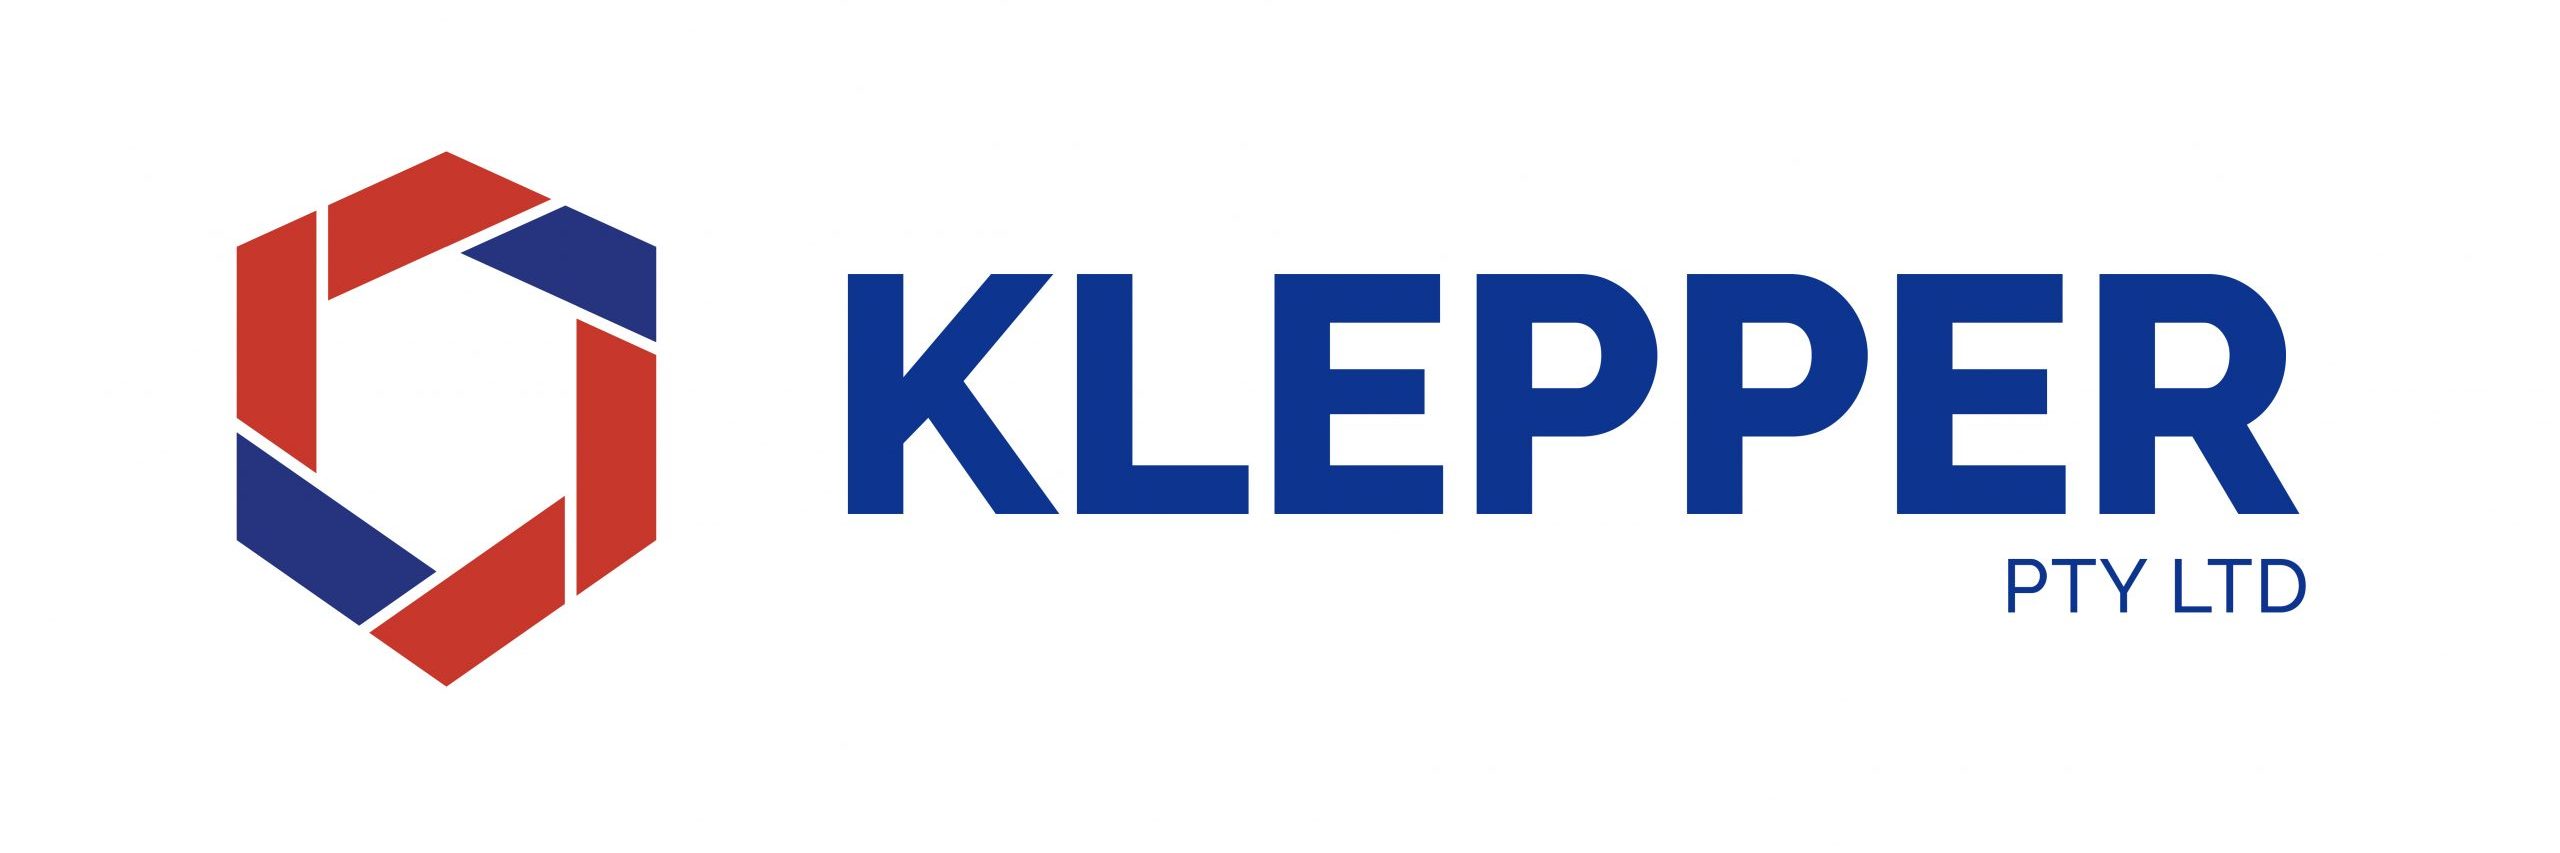 Business Management Consulting & Training Services | Klepper